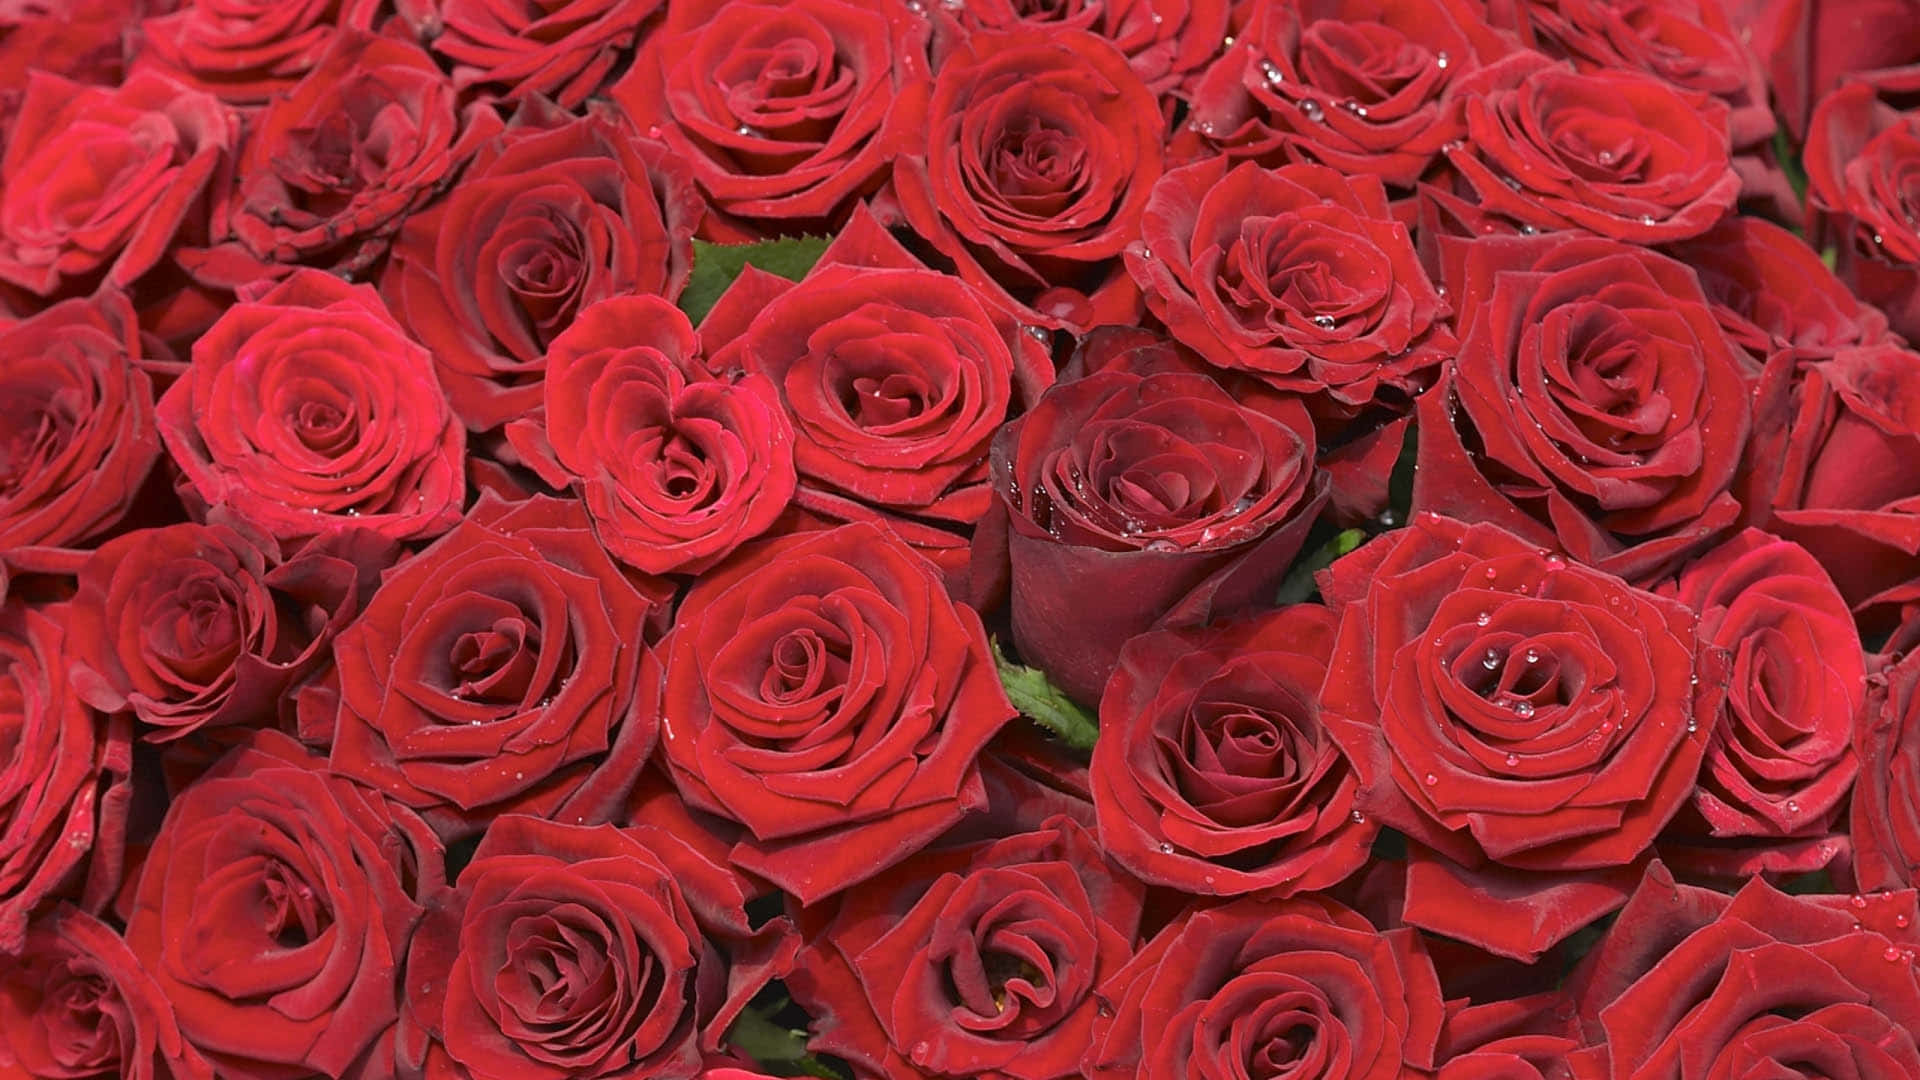 1440p Romantic Red Roses Background